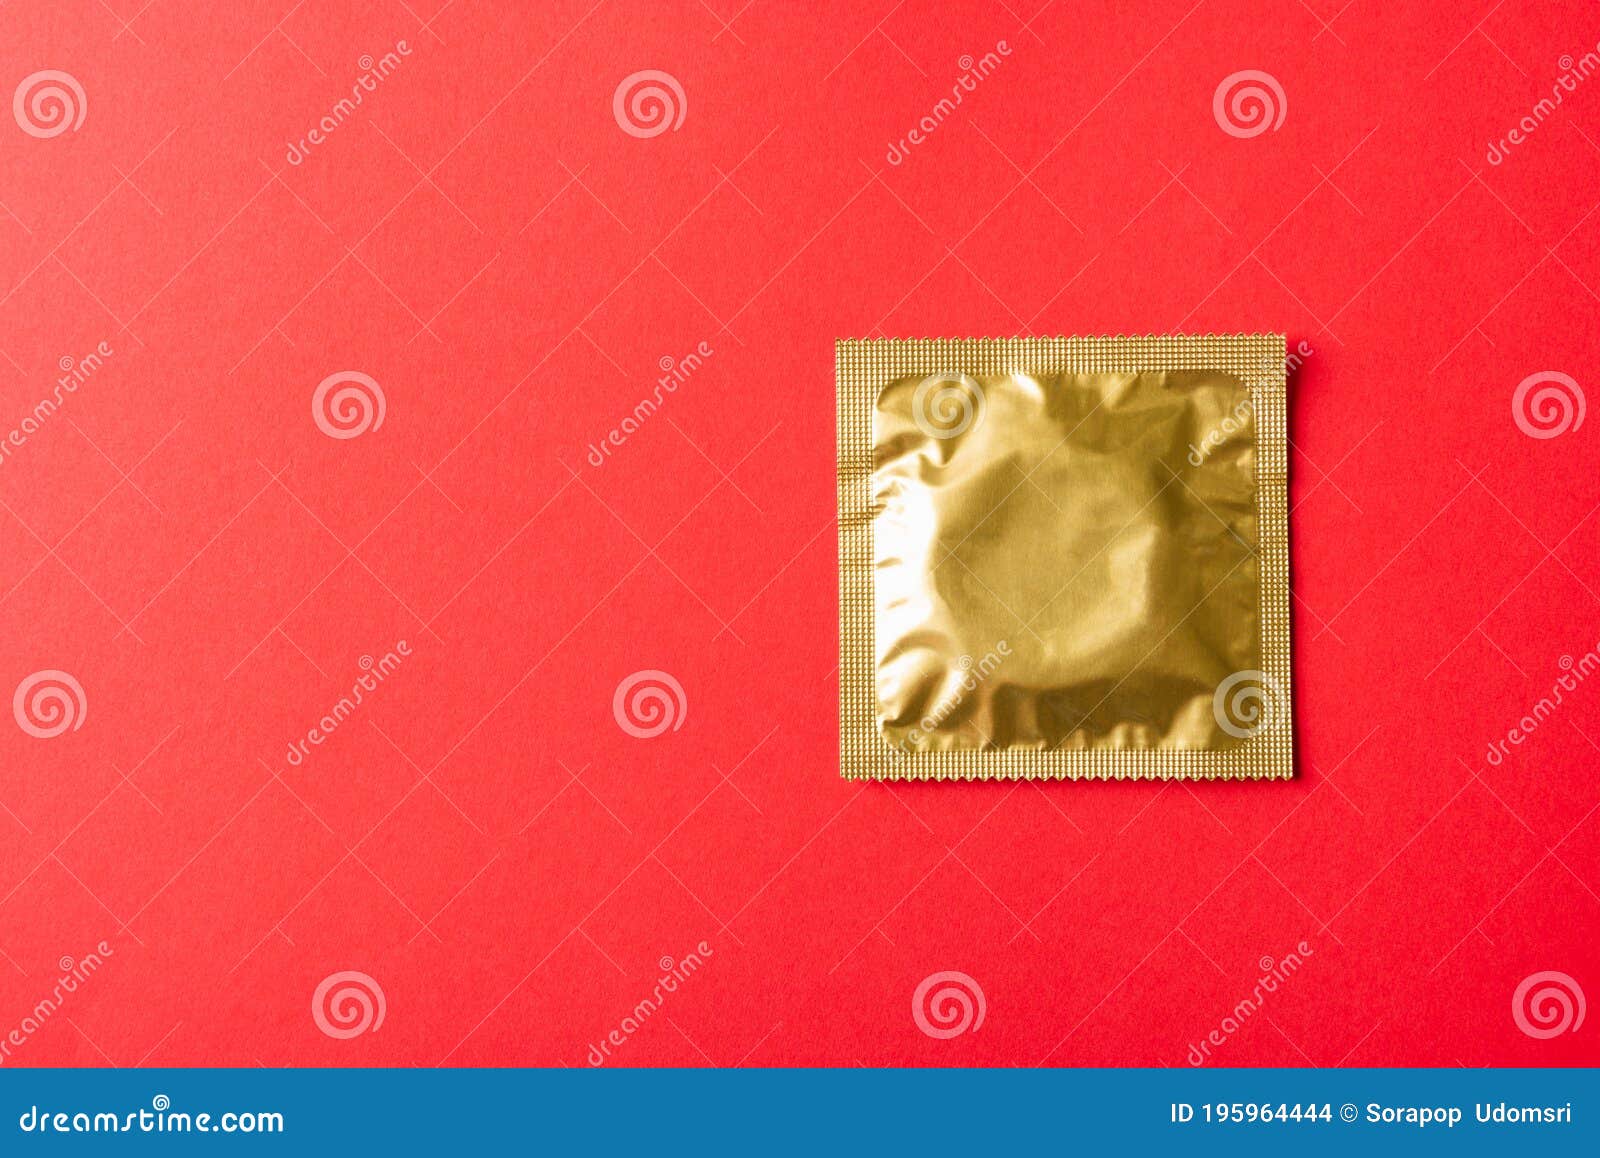 4,365 Condom Stock Photos - Free & Royalty-Free Stock Photos from Dreamstime